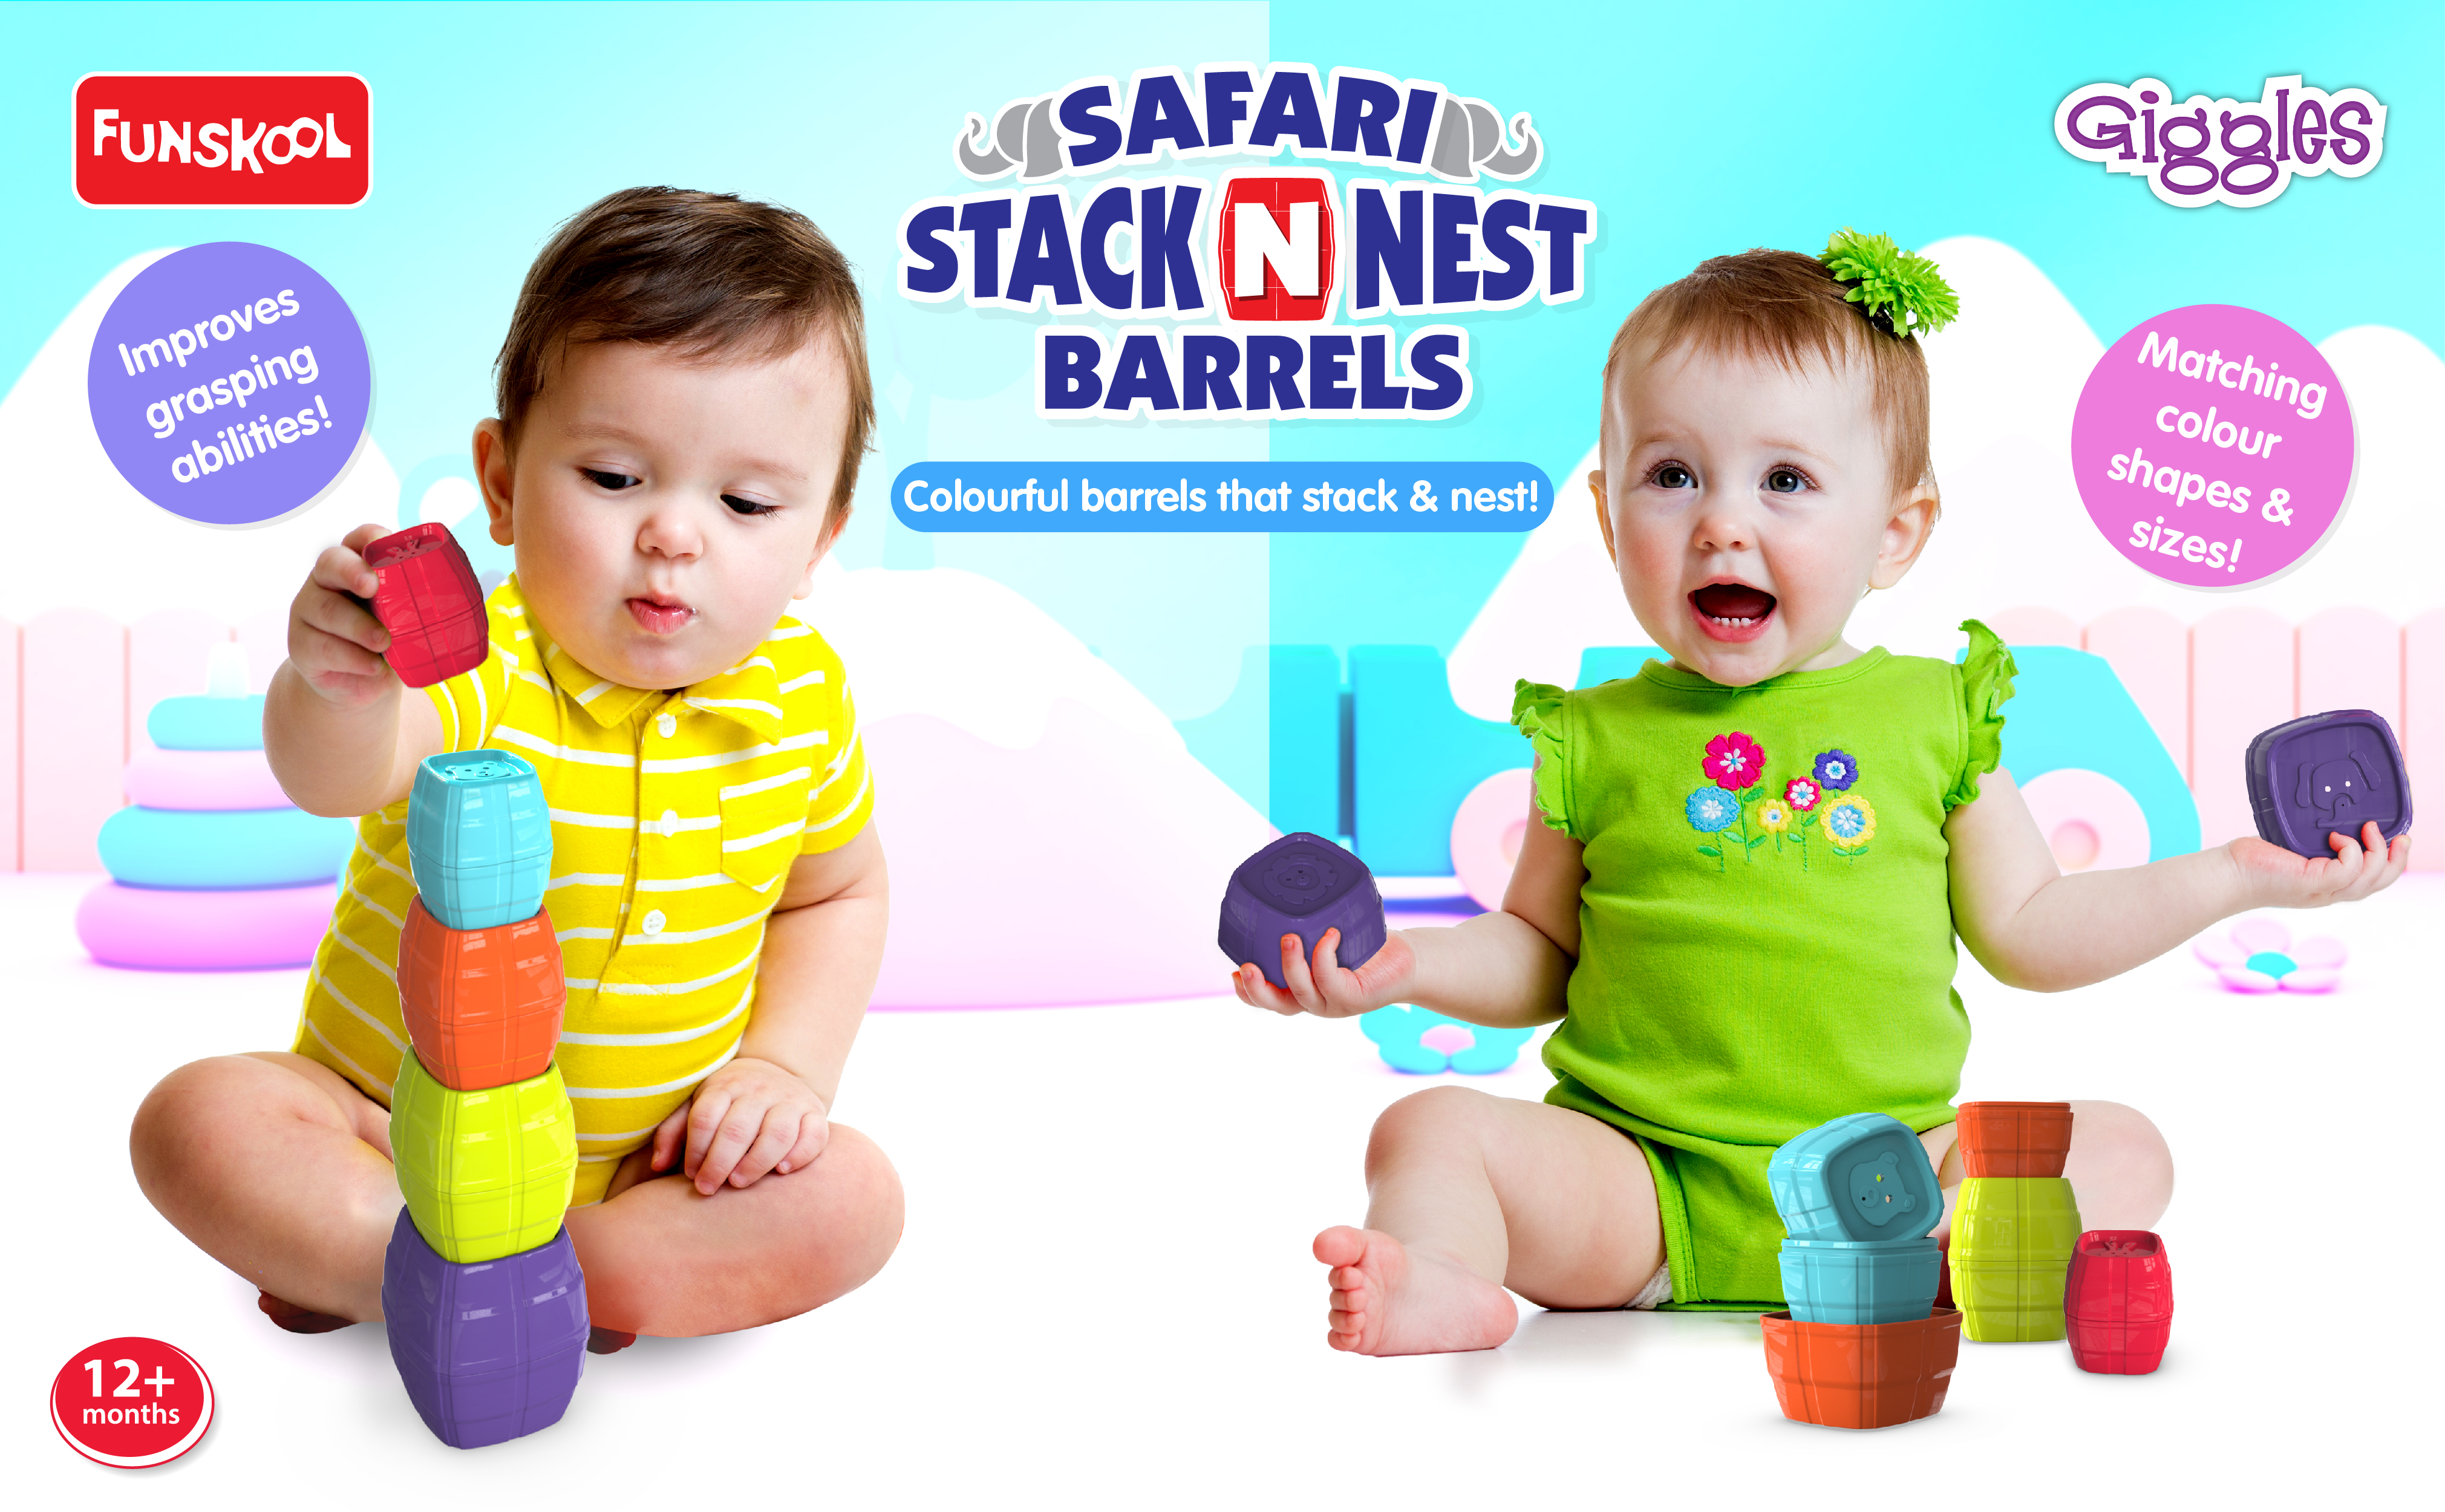 Giggles - Safari Stack N Nest Barrels, Multi-colour Stacking Barrels with Animal Faces, Helps to Sort, Stack and Nest, 12 months & above, Infant and Pre School Toys